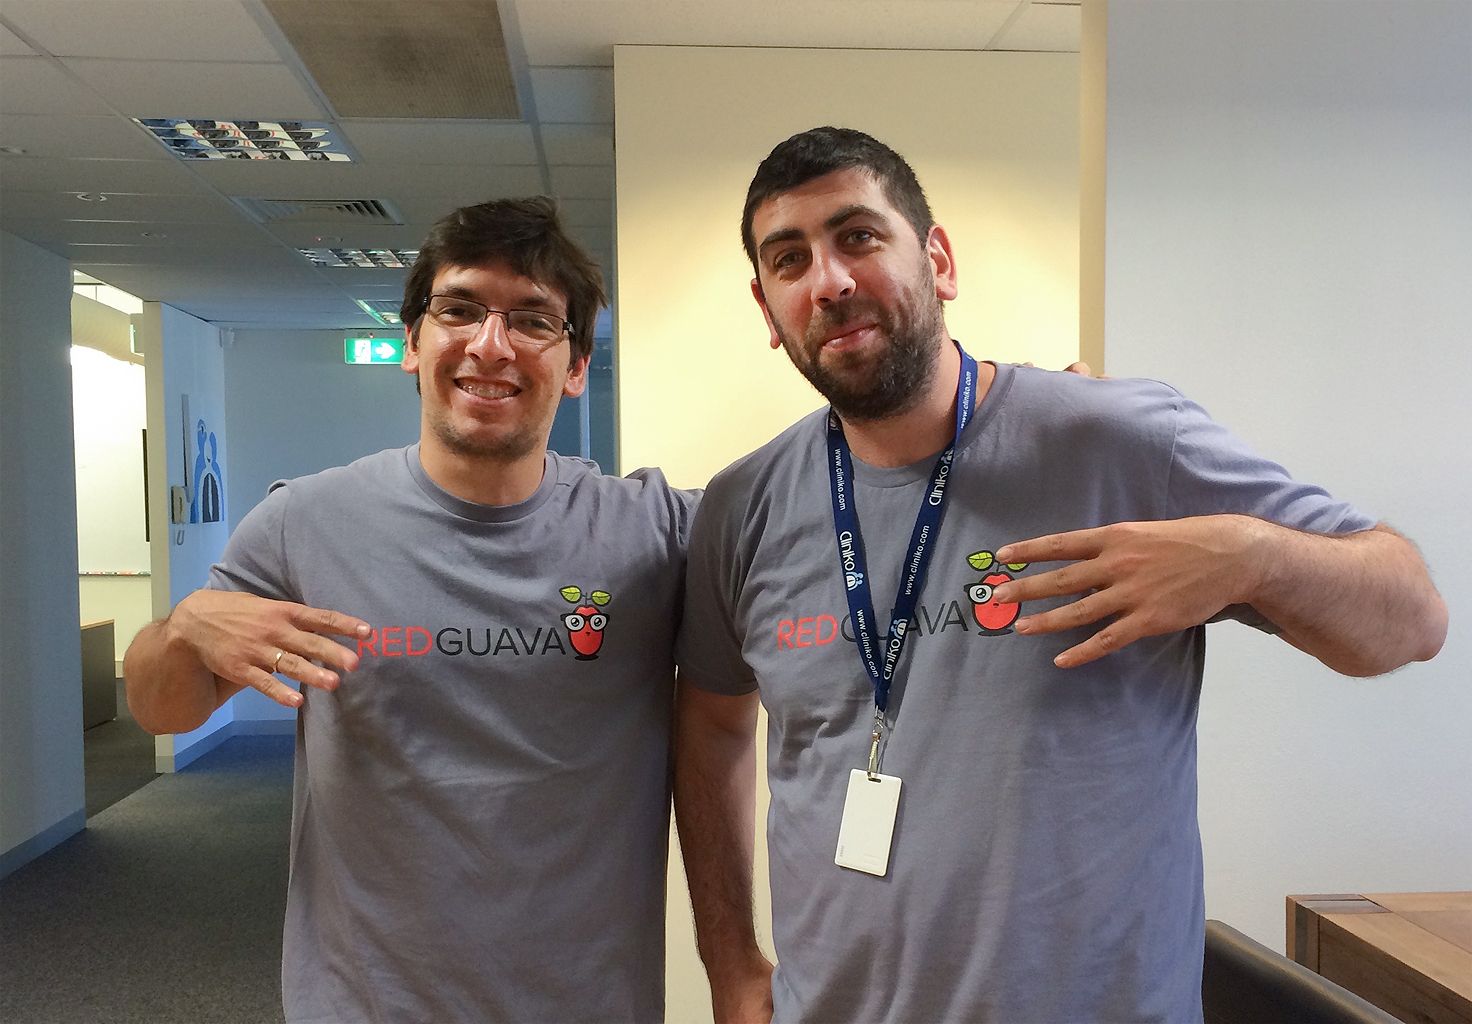 Two members of the Cliniko team wearing 'Red Guava' t-shirts in our first office in Melbourne.